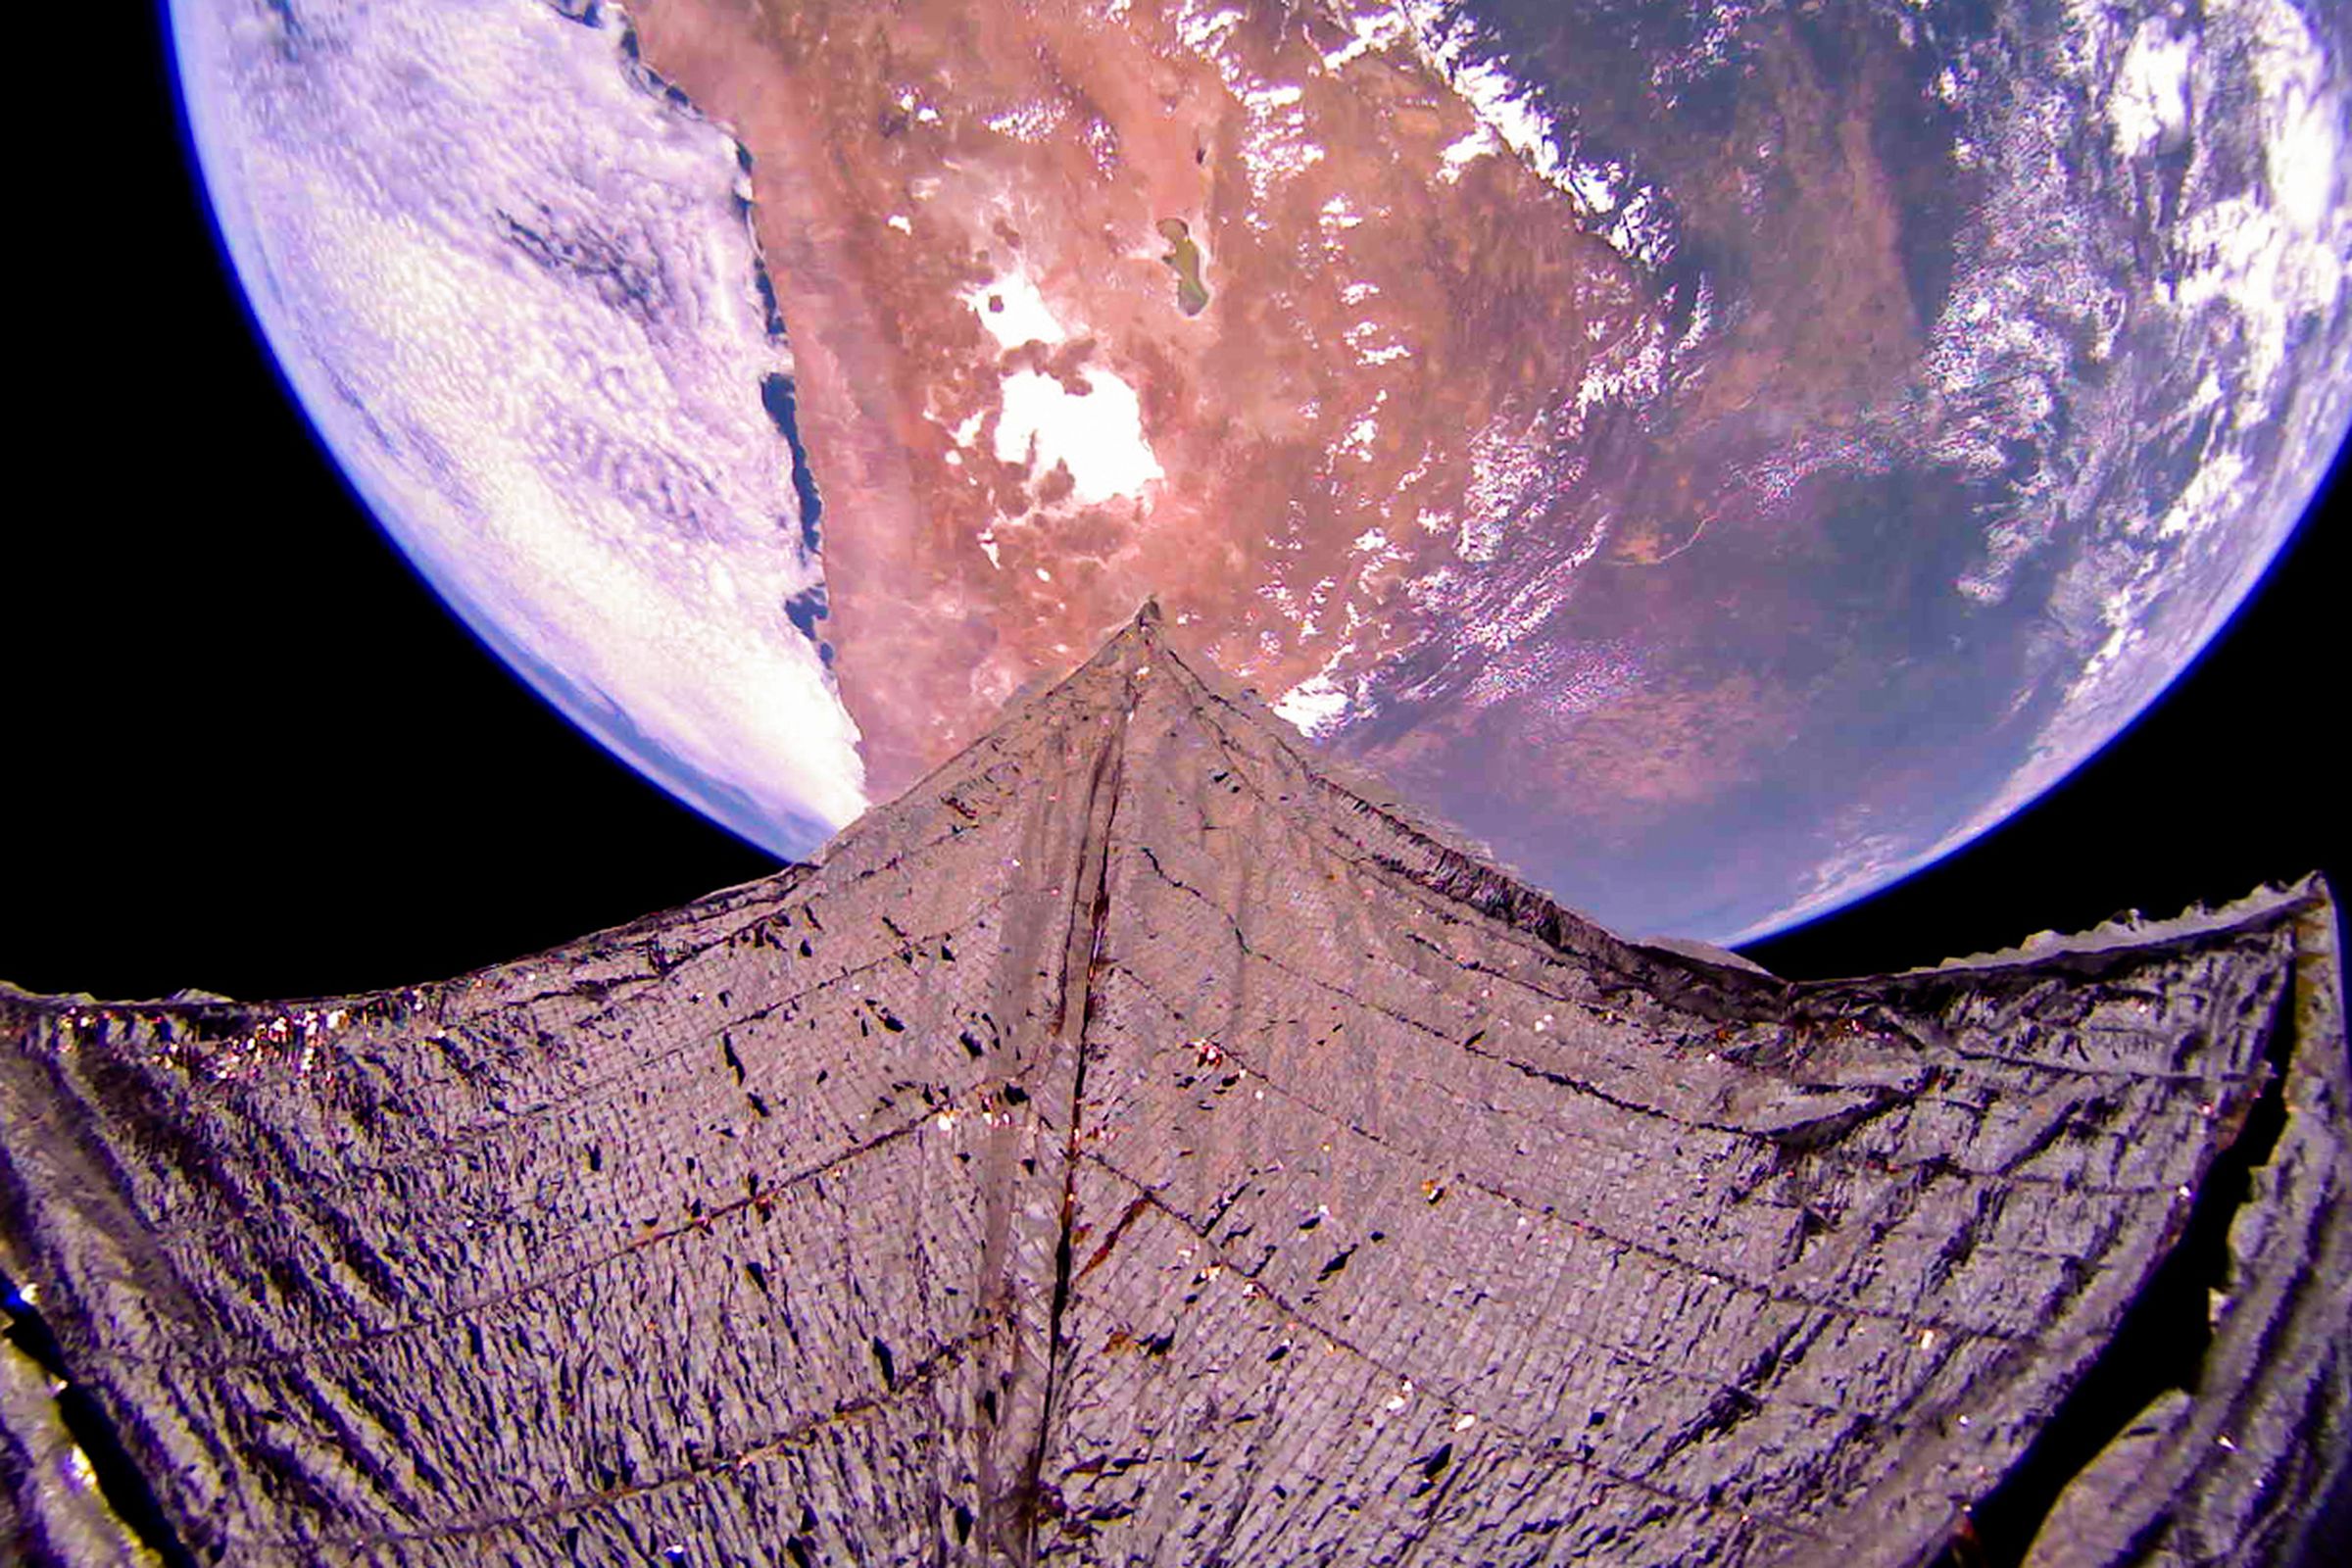 A metallic solar sail fills the bottom of the image. Above it part of the disc of the Earth is visible, with part of South America dominating the view.